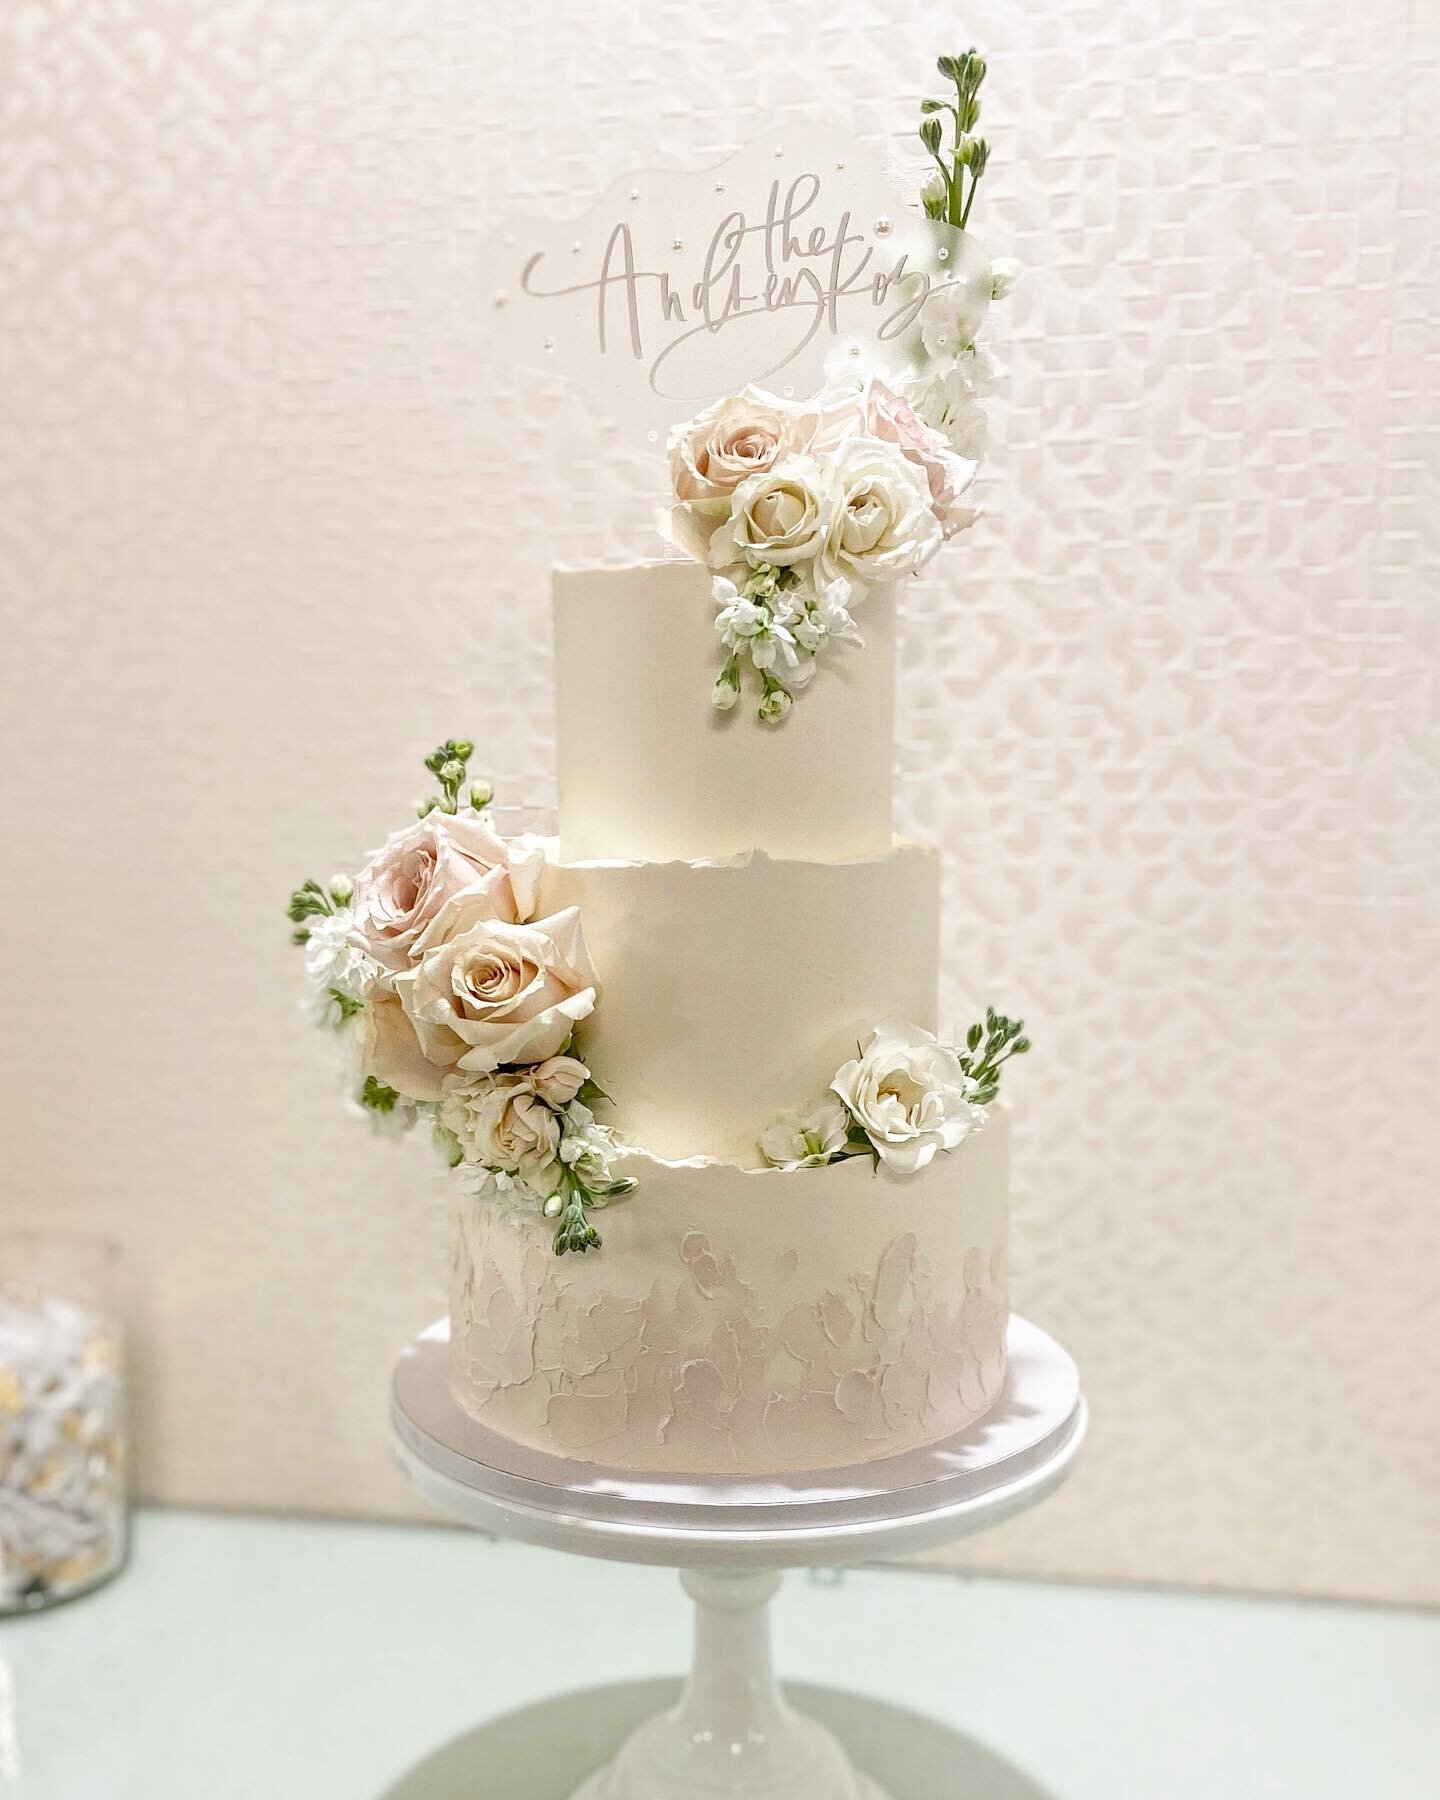 Modern, elegant and timeless is what we strive to create in every cake design 🤍

We really enjoy arranging the florals on your cake for your wedding day.  It's one of our favorite things to do and helps to incorporate your flowers into the overall d